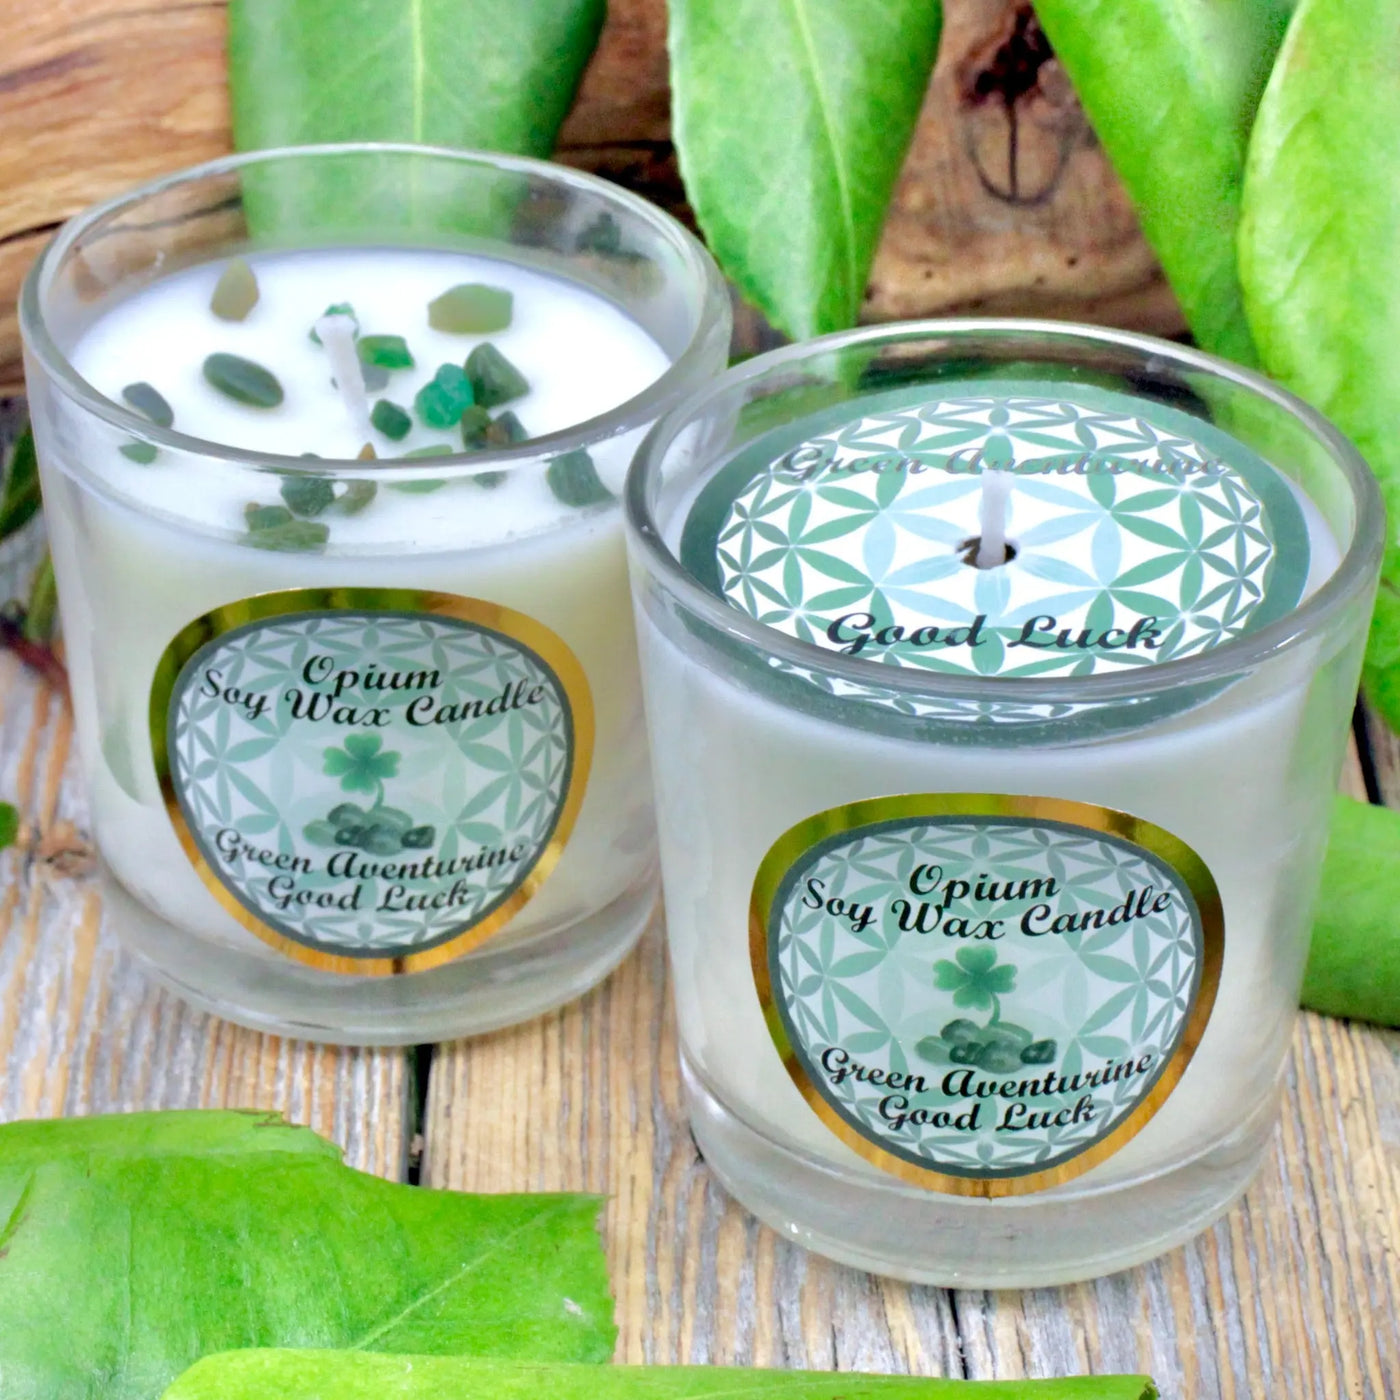 Good Luck Soy Candle - Opium with Green Aventurine